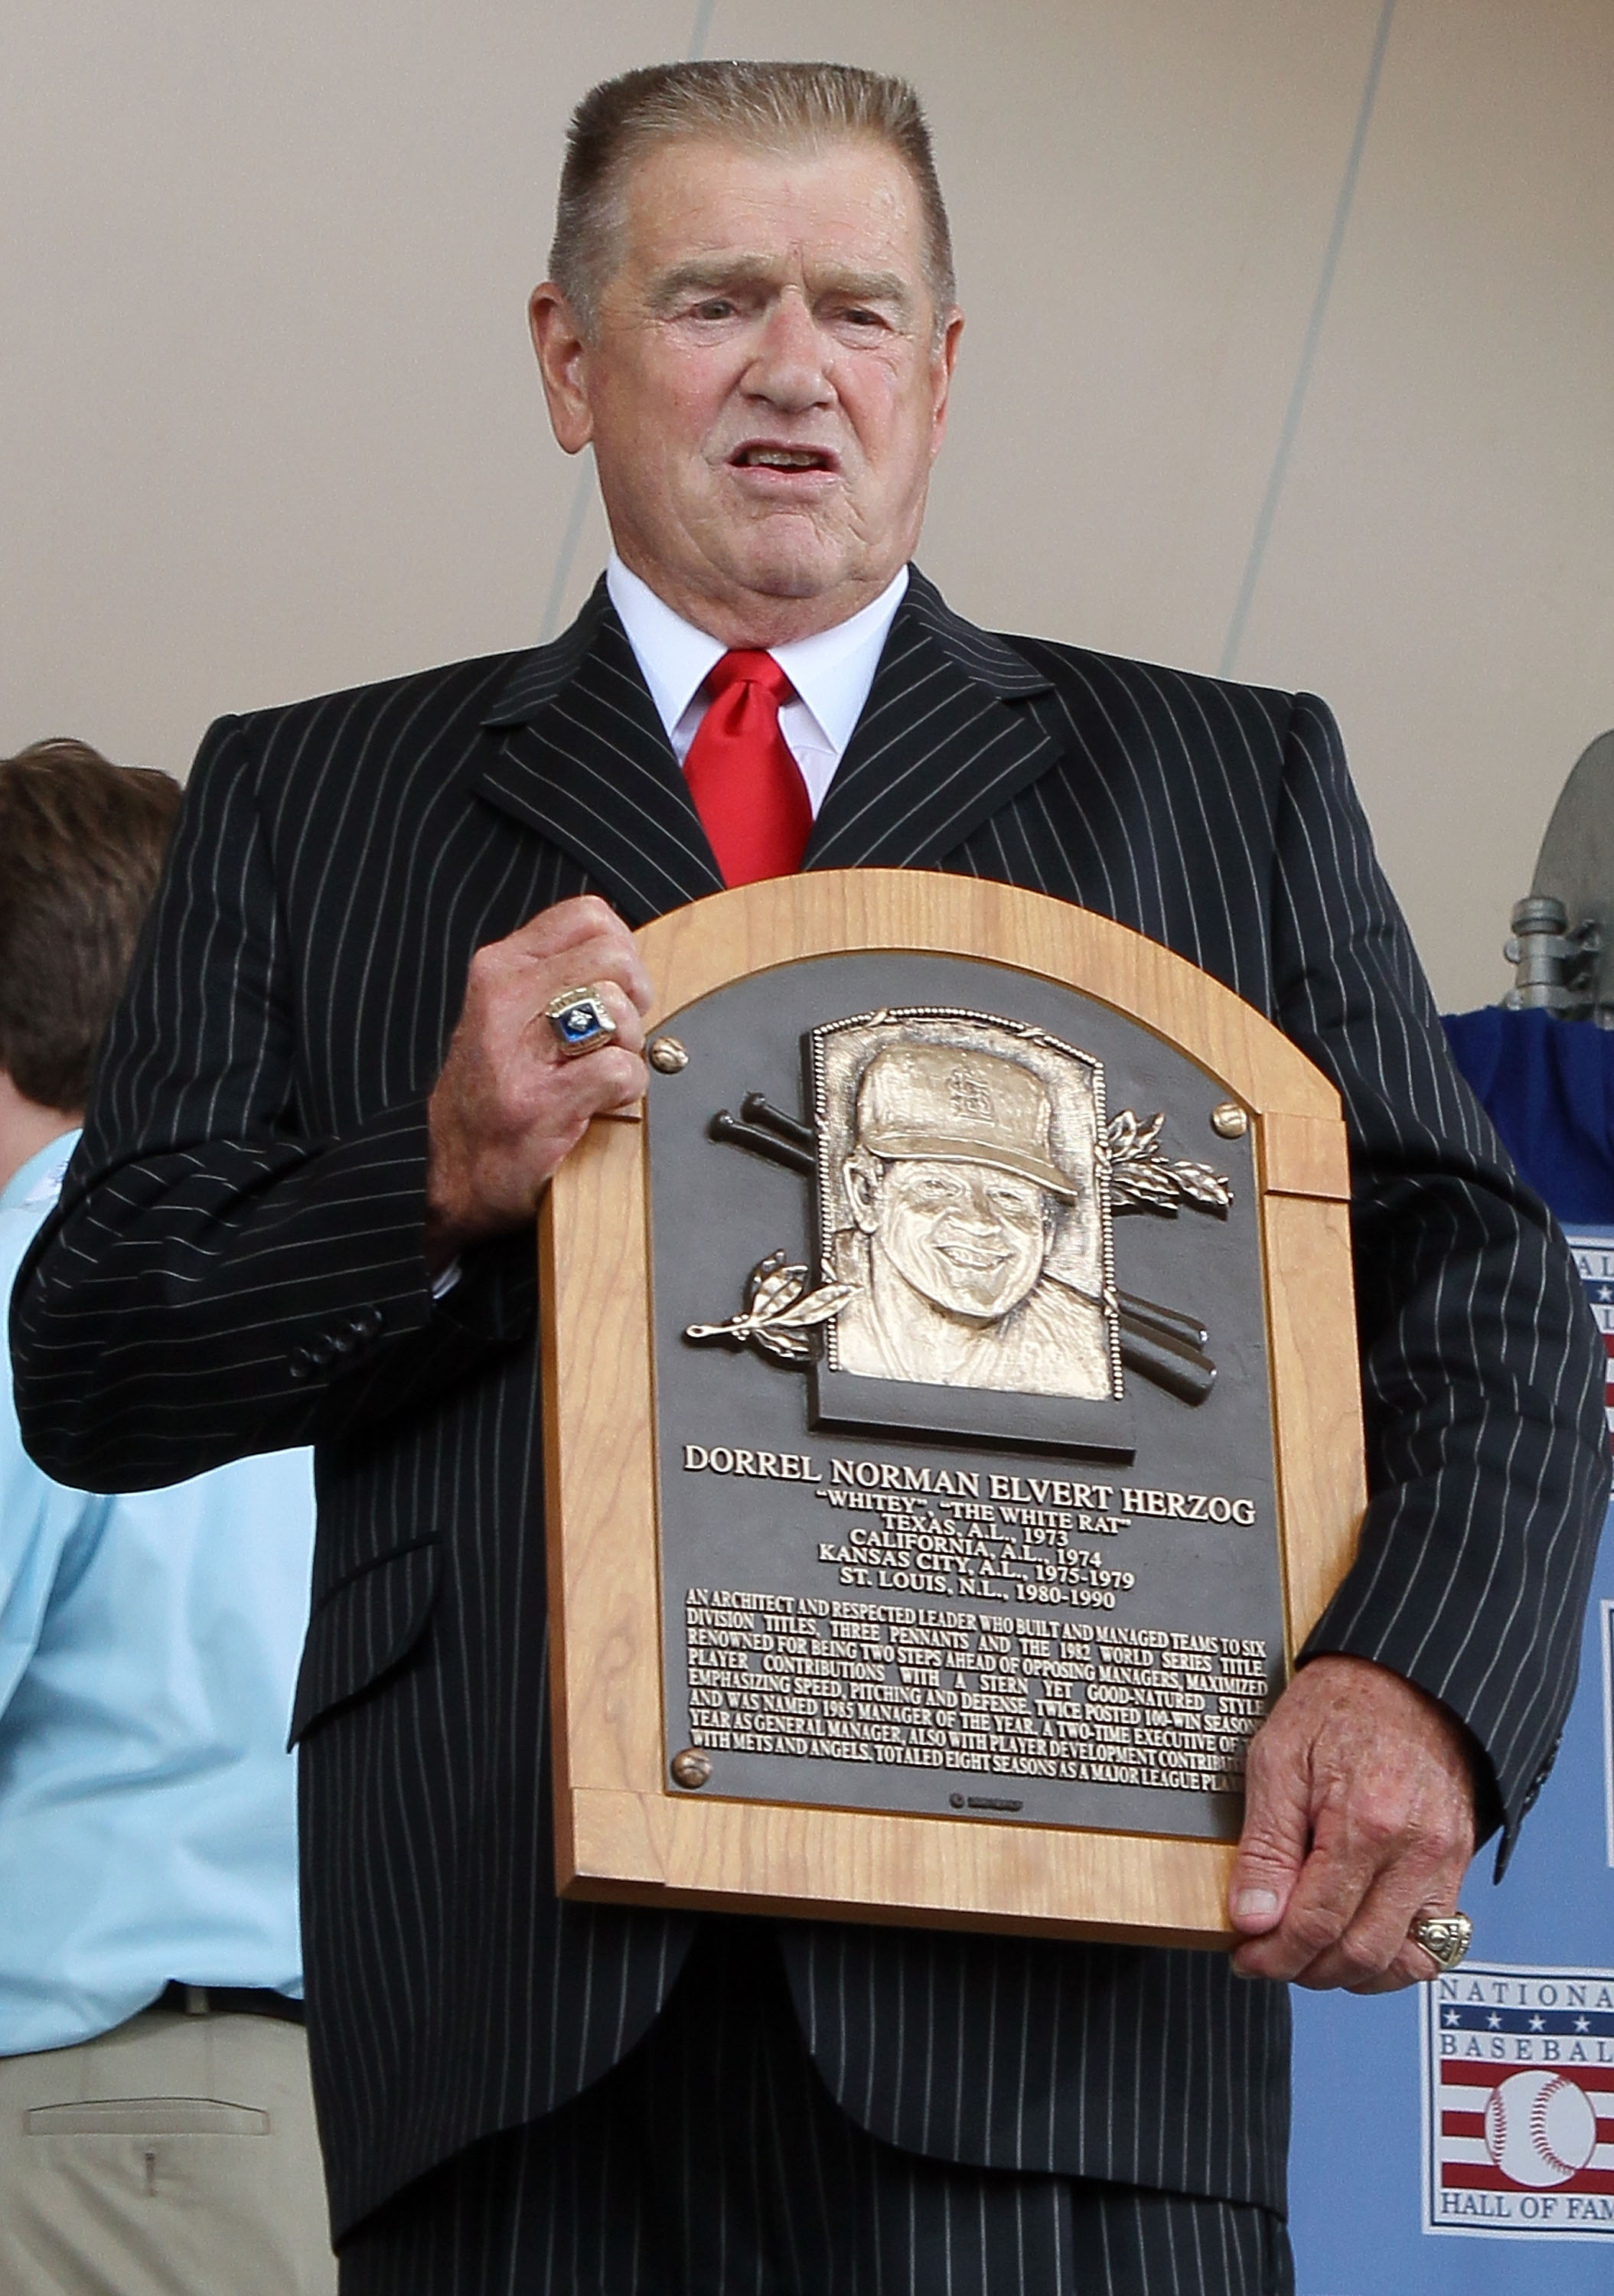 COOPERSTOWN, NY - JULY 25:  2010 inductee Whitey Herzog poses for a photograph with his plaque at Clark Sports Center during the Baseball Hall of Fame induction ceremony on July 25, 20010 in Cooperstown, New York. Herzog served as manager for four teams a